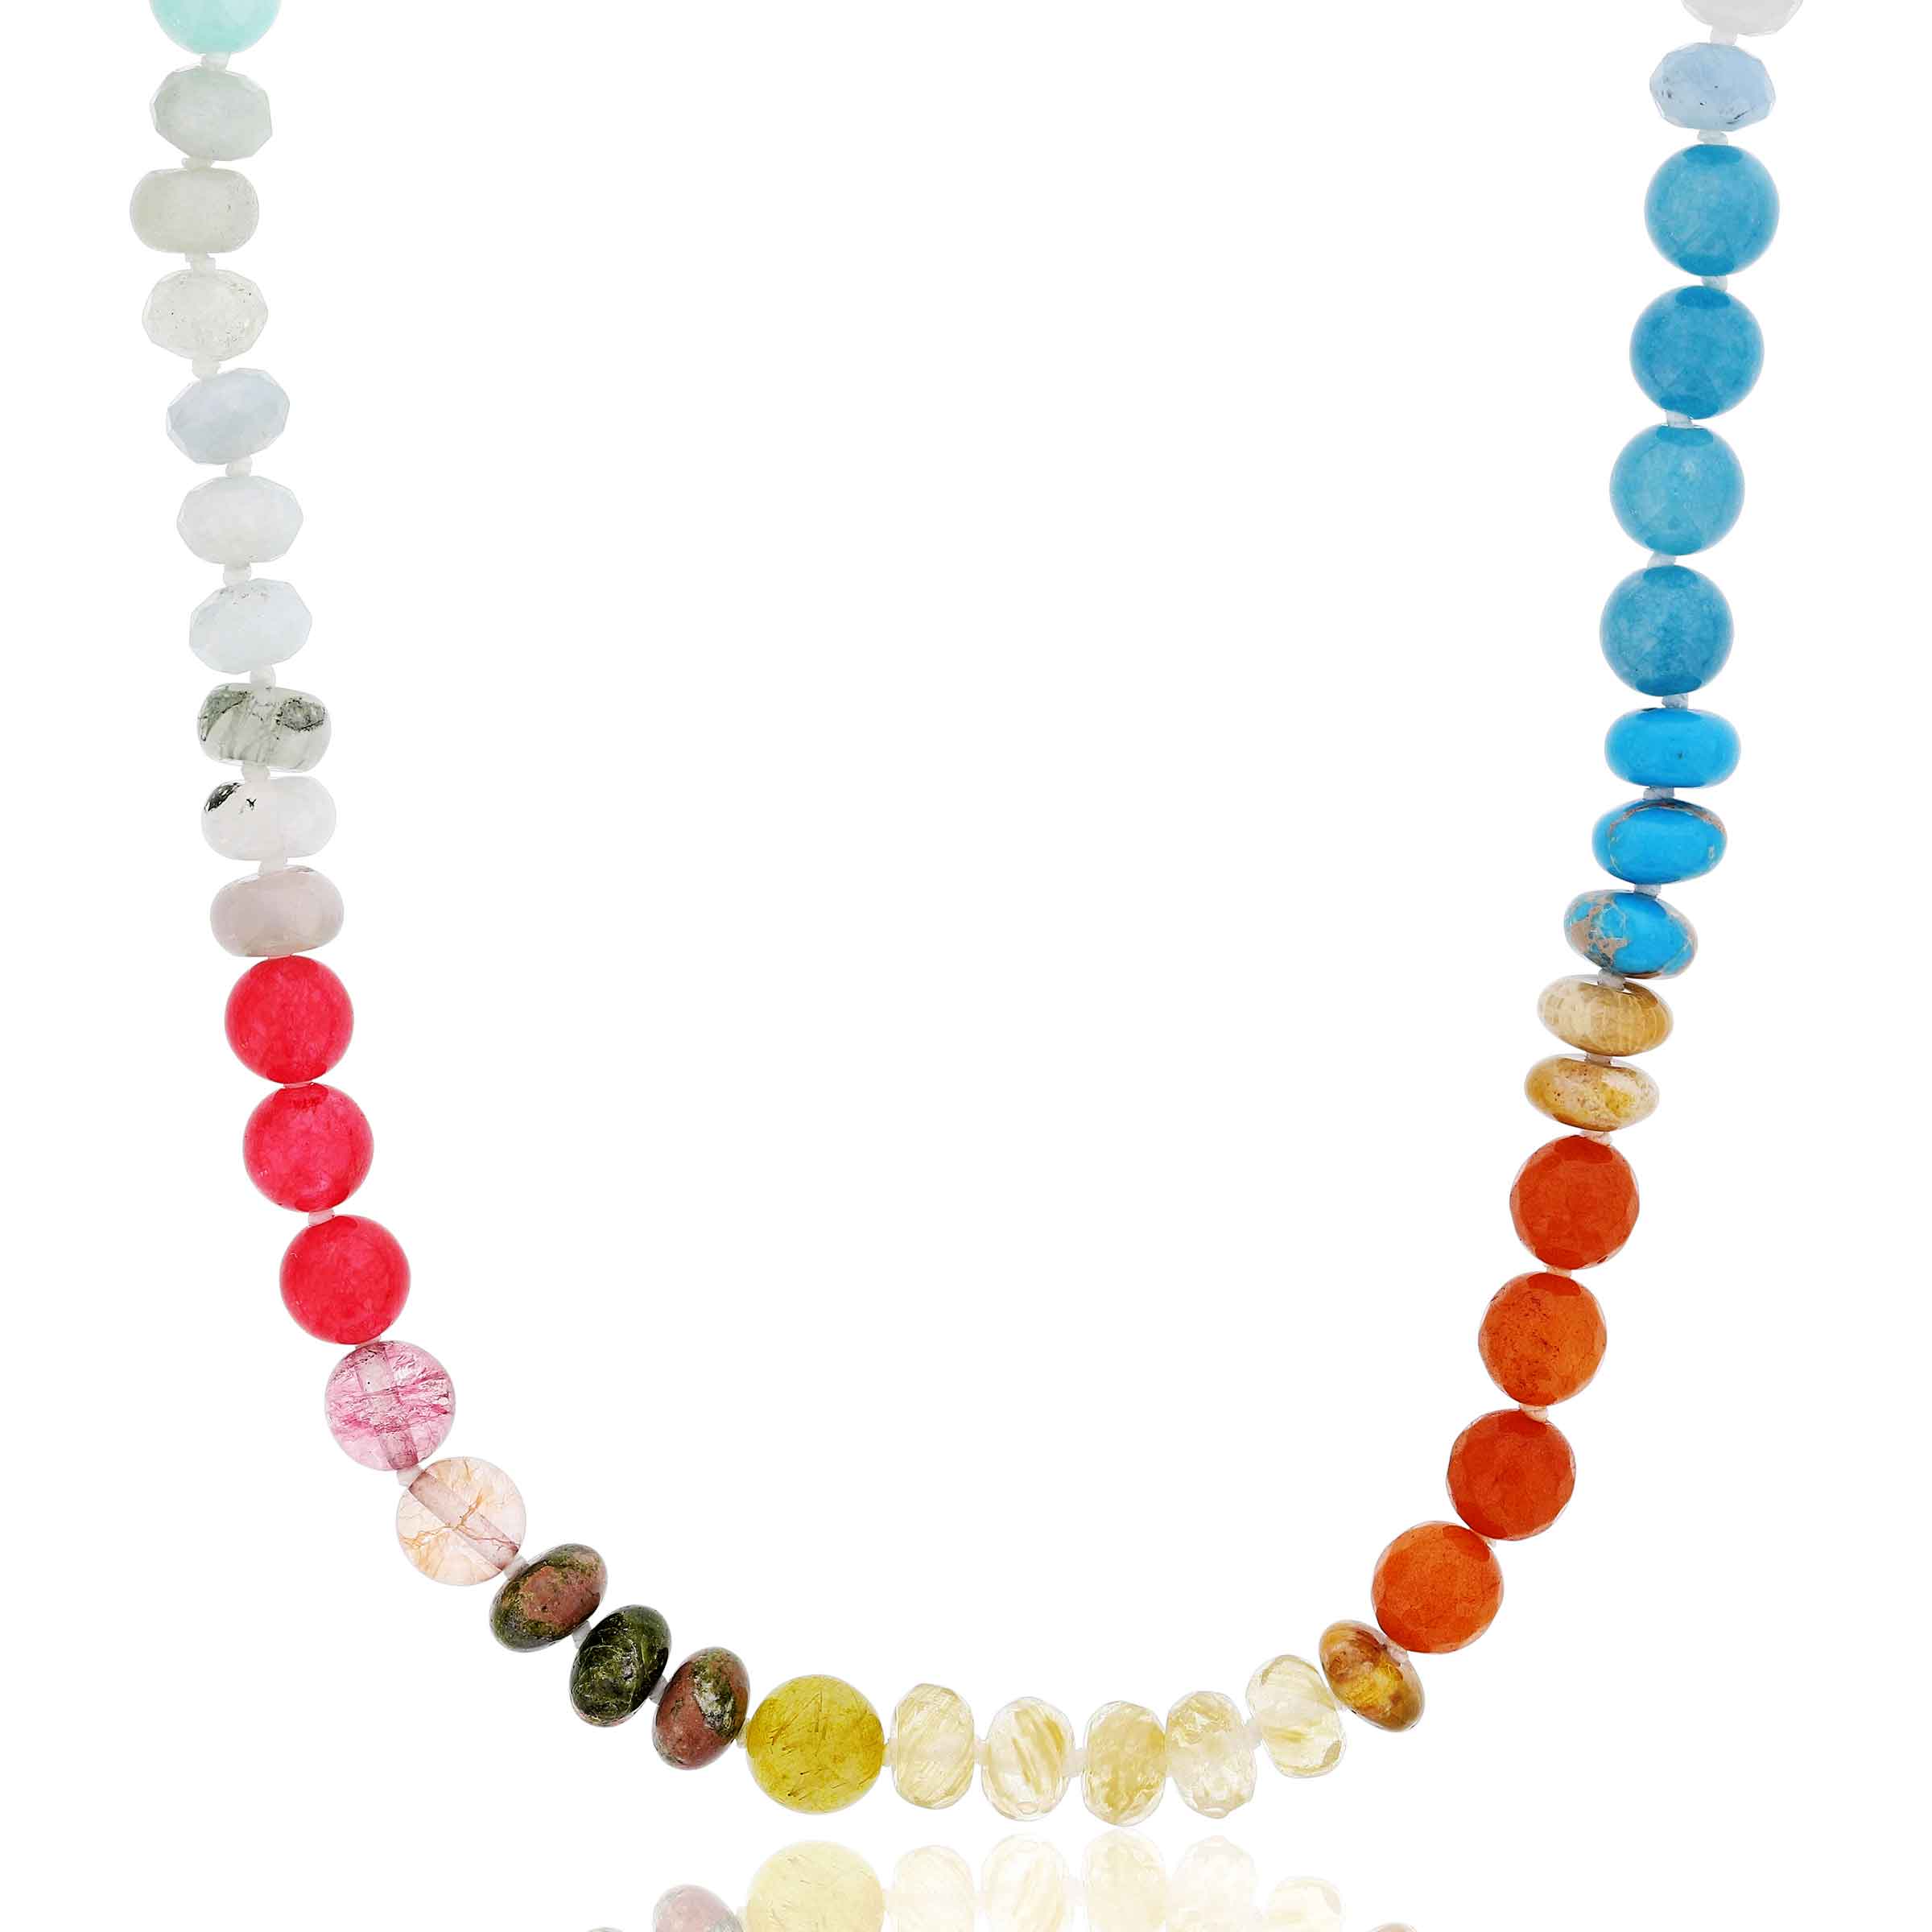 Apatite, Amazonite, Pink Quartz and Fossilized Wood Beads Necklace, 20 Inches